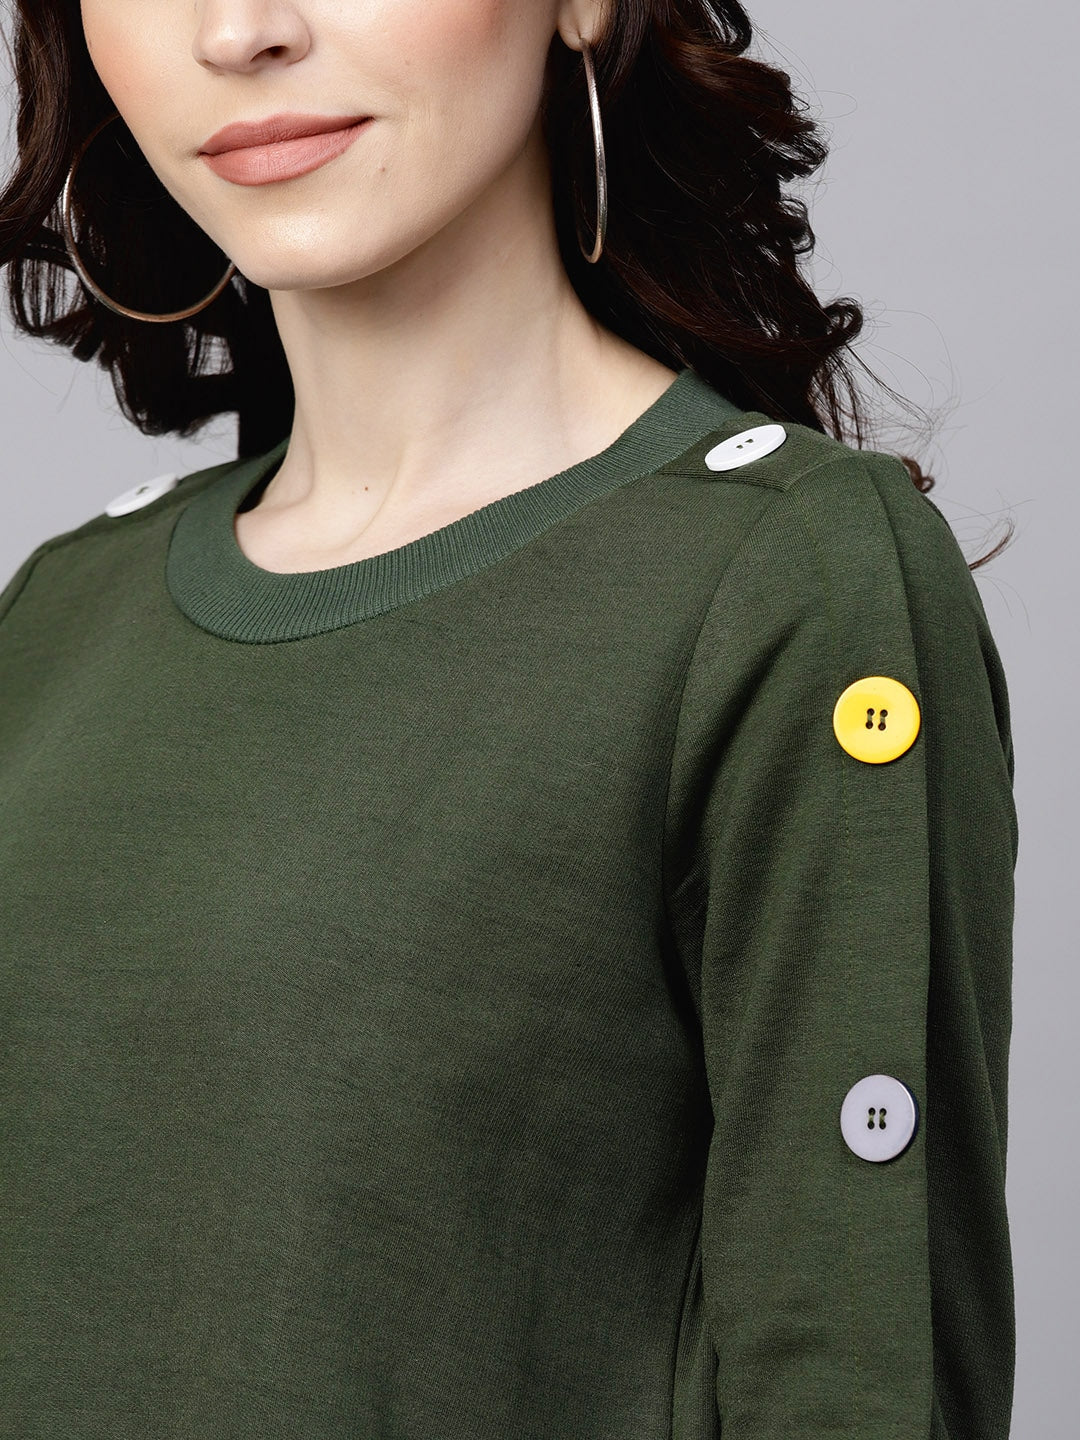 Olive Sweatshirt With Colored Buttons